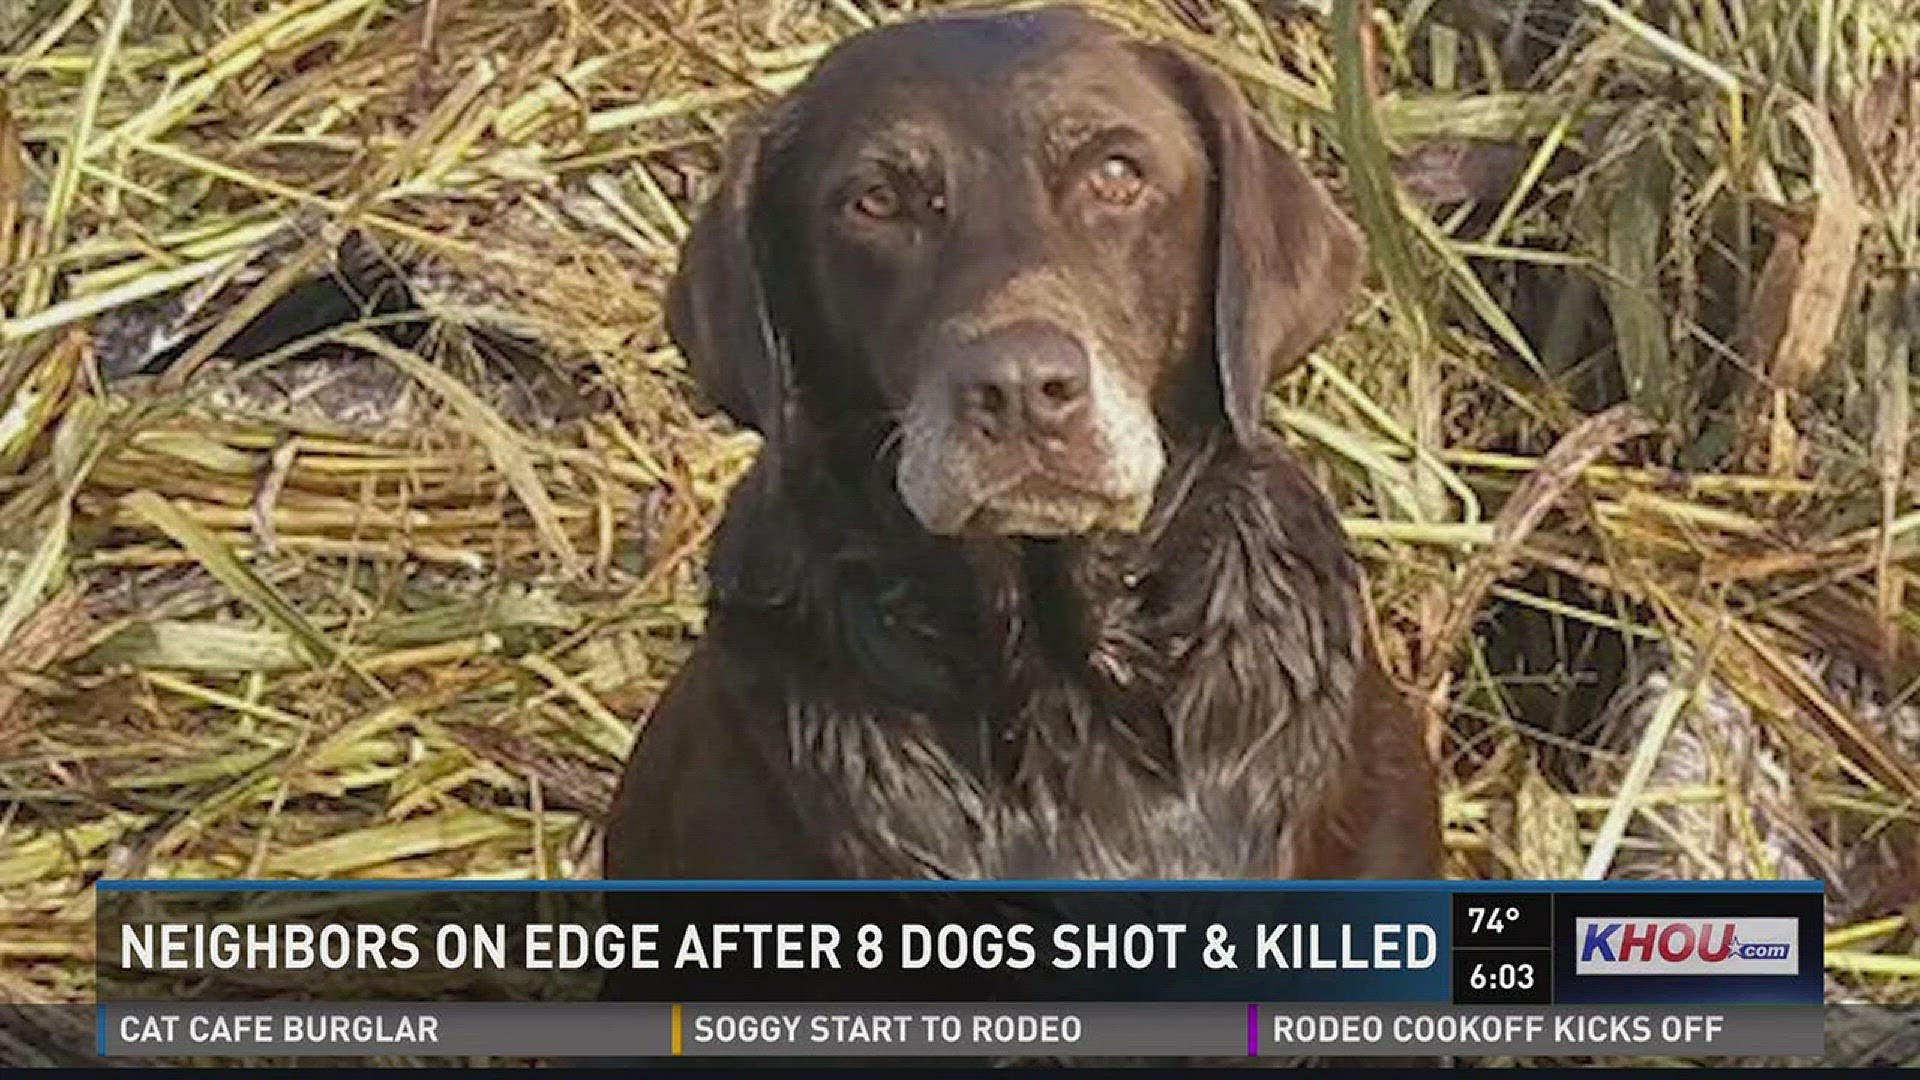 A dog killer has neighbors in the Deer Trails community of Conroe living on edge.